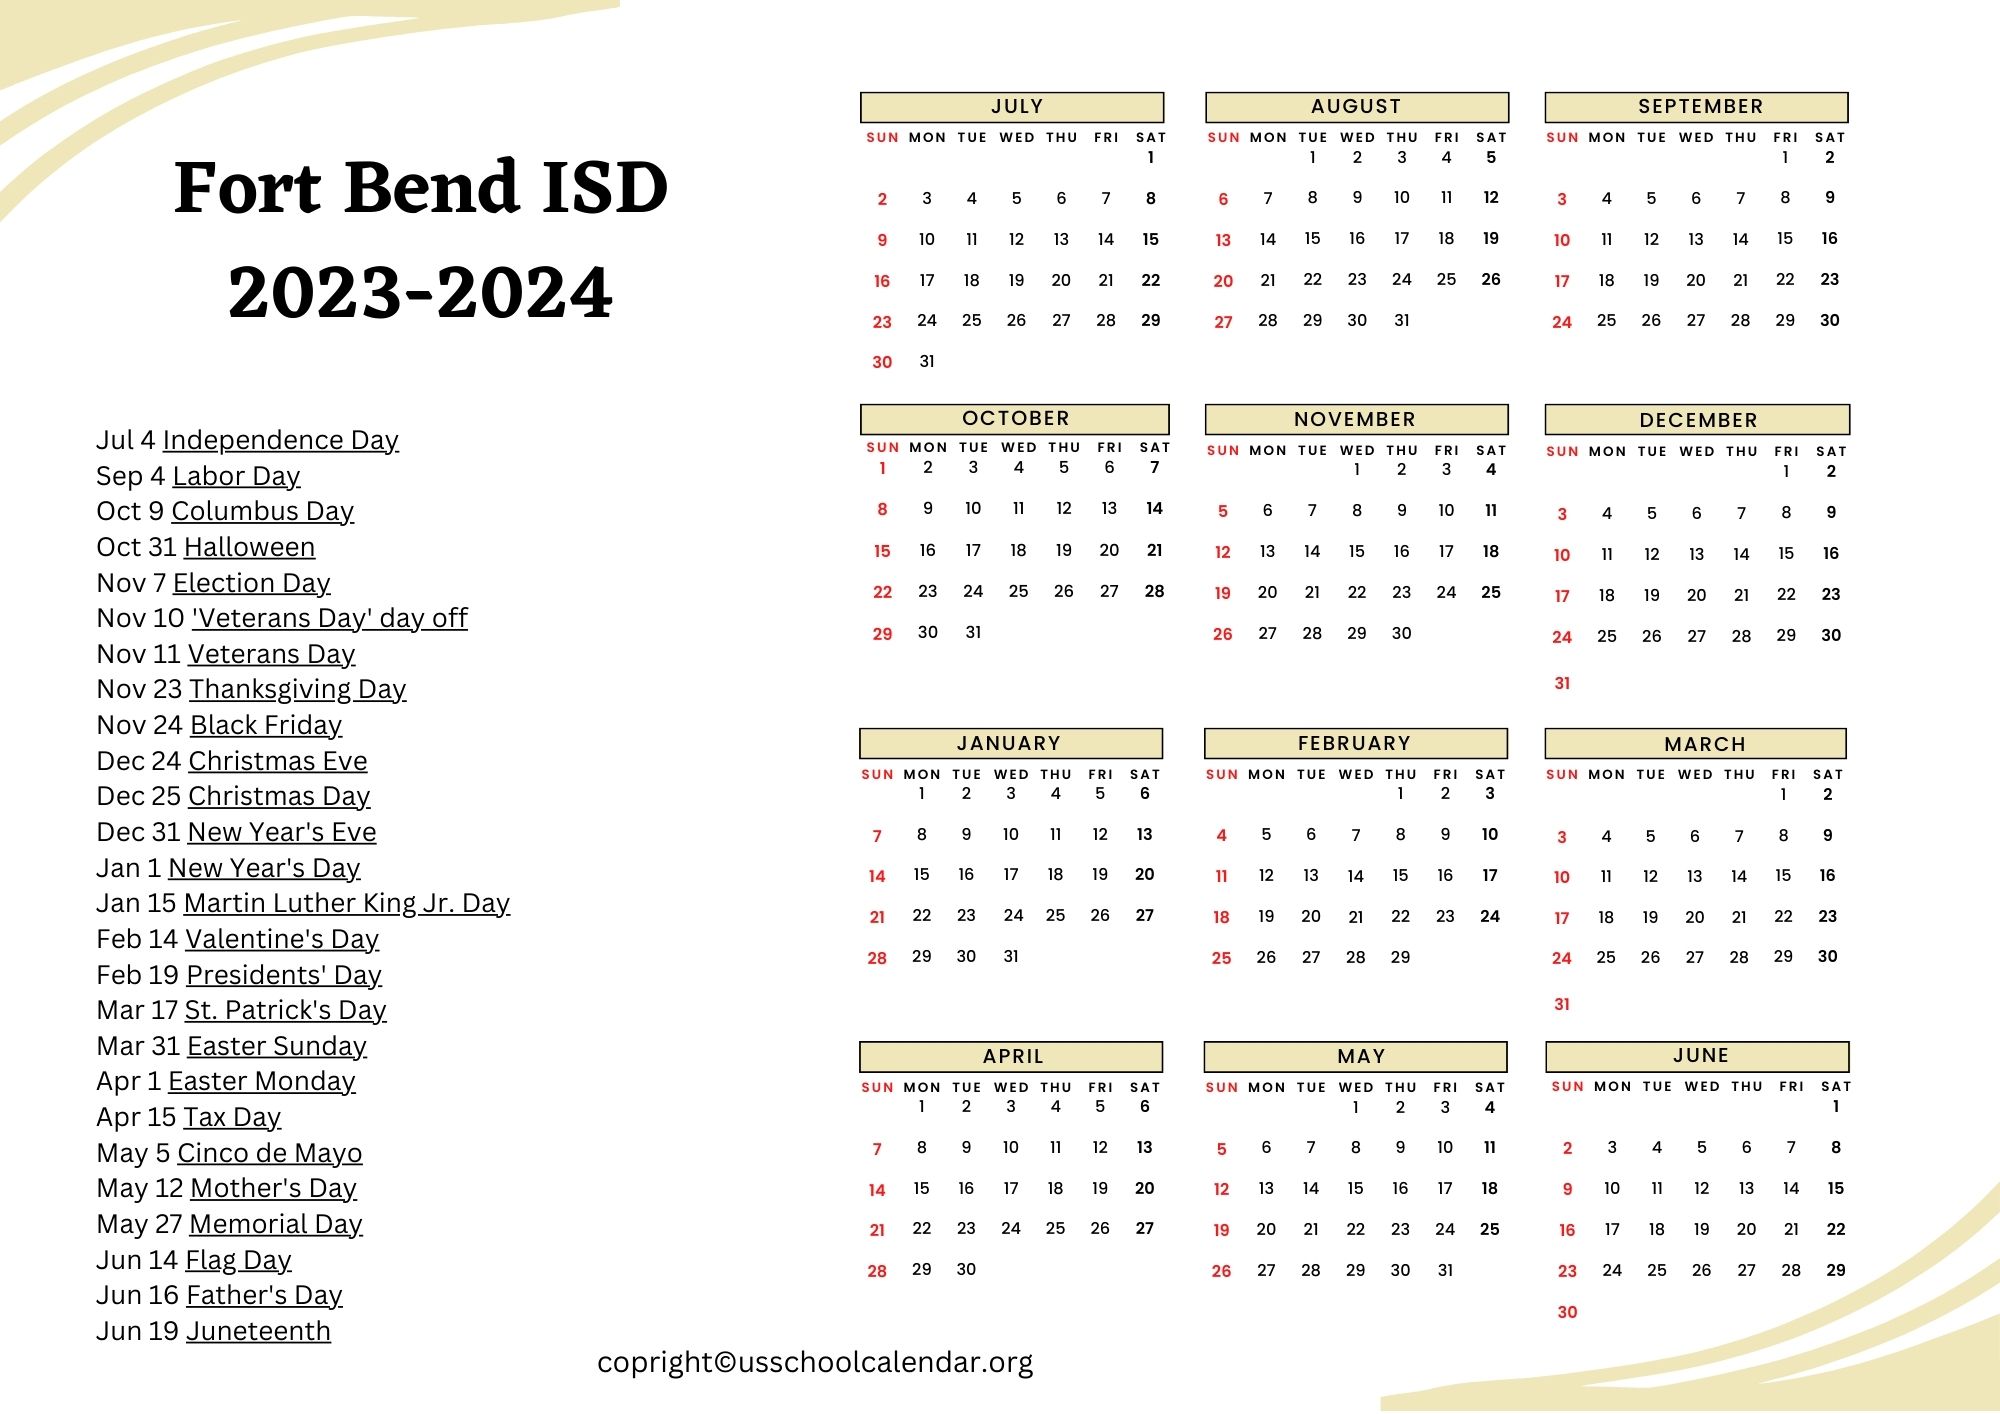 fort-bend-isd-calendar-with-holidays-2023-2024